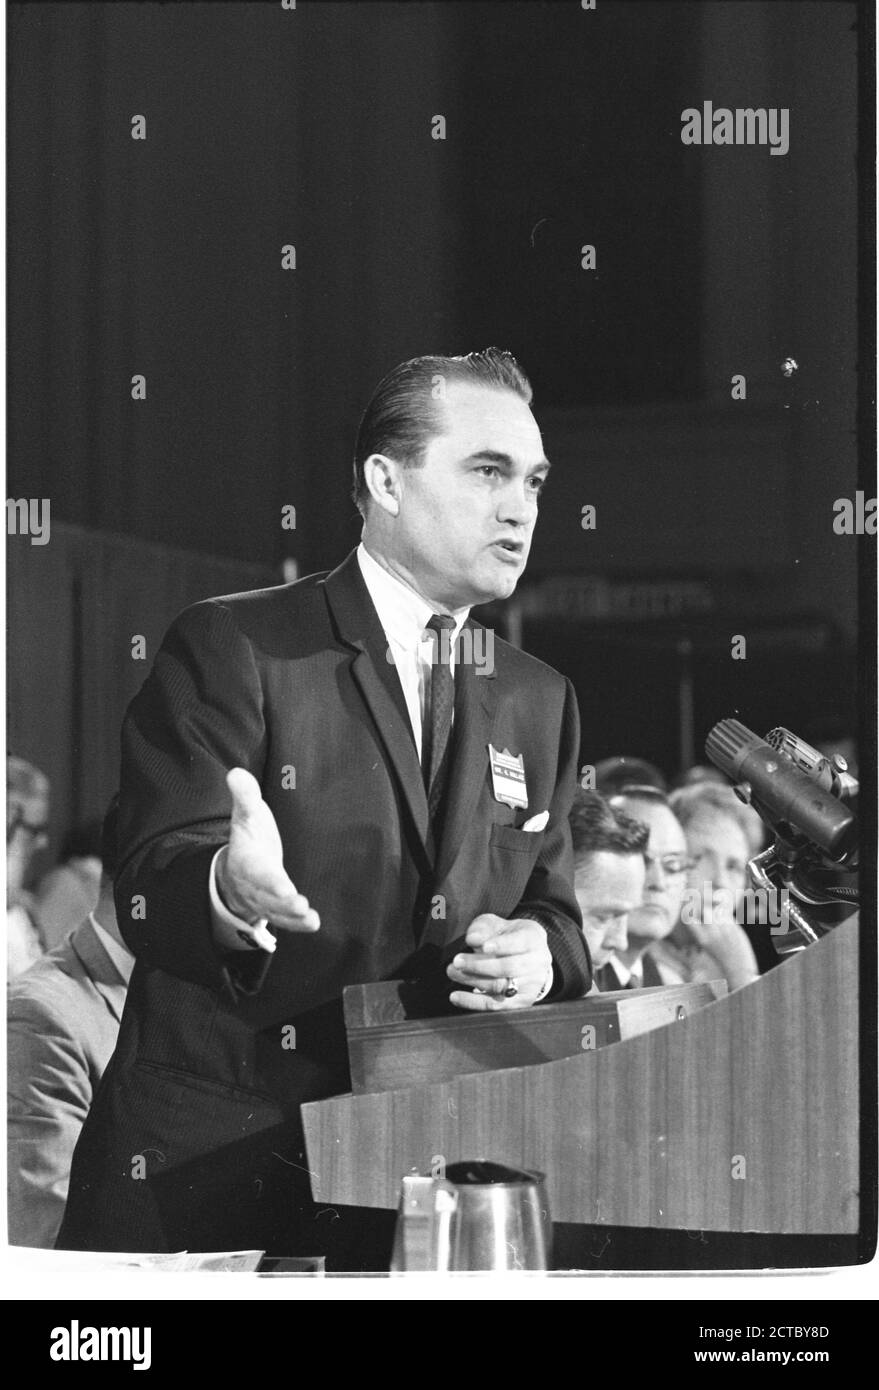 Governor George C Wallace (1919-1998) of Alabama addresses an audience from the podium at the Democratic National Convention, Atlantic City, NJ, 8/1964. (Photo by Warren K Leffler/US News & World Report Magazine Photograph Collection/RBM Vintage Images) Stock Photo